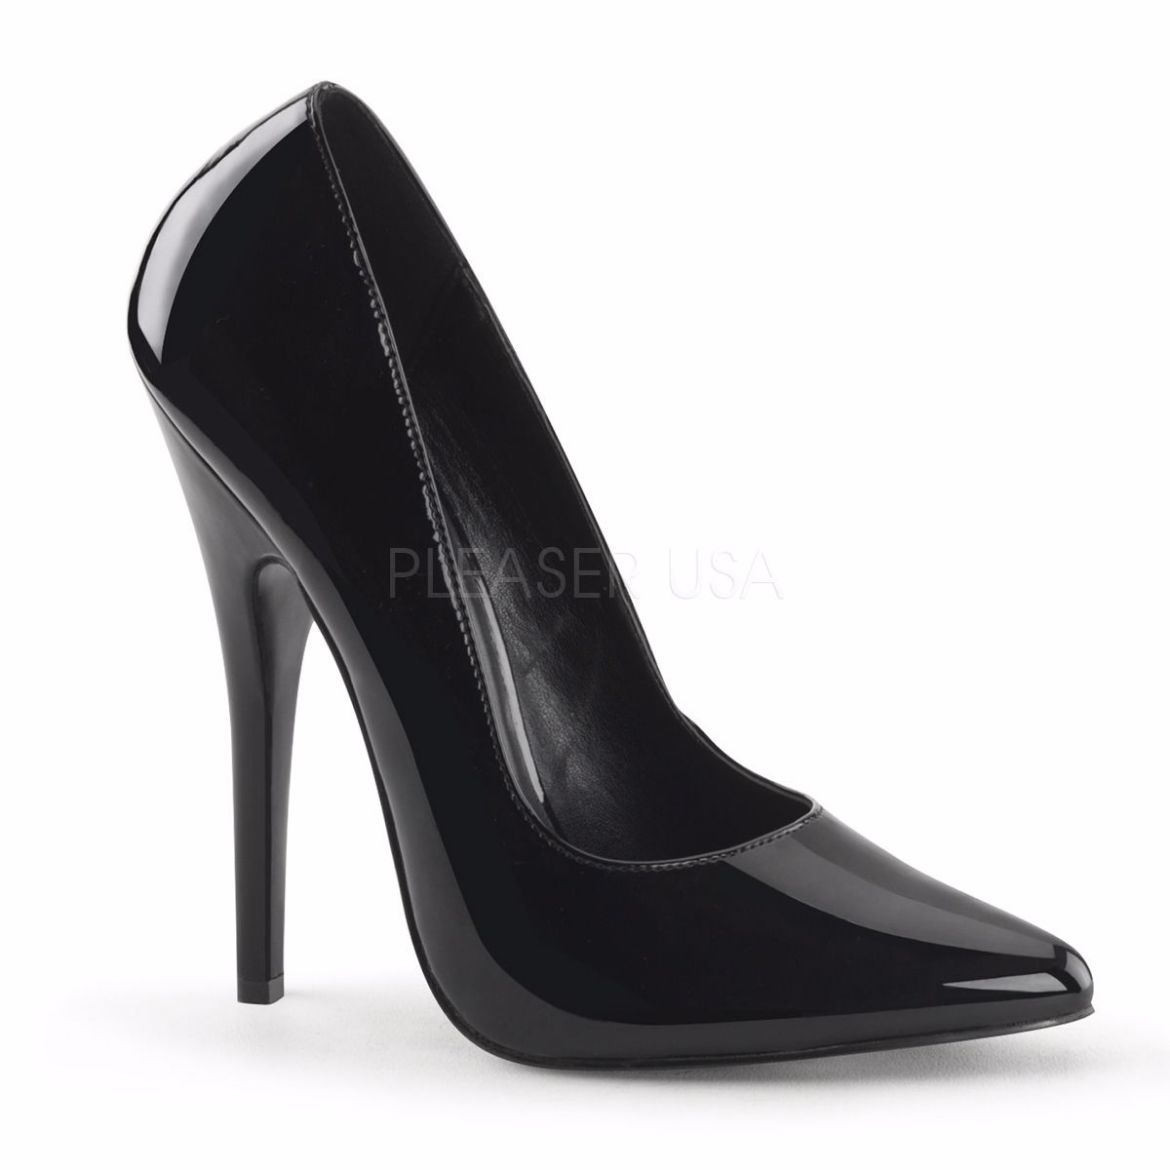 Product image of Devious Domina-420 Black Patent, 6 inch (15.2 cm) Heel Court Pump Shoes